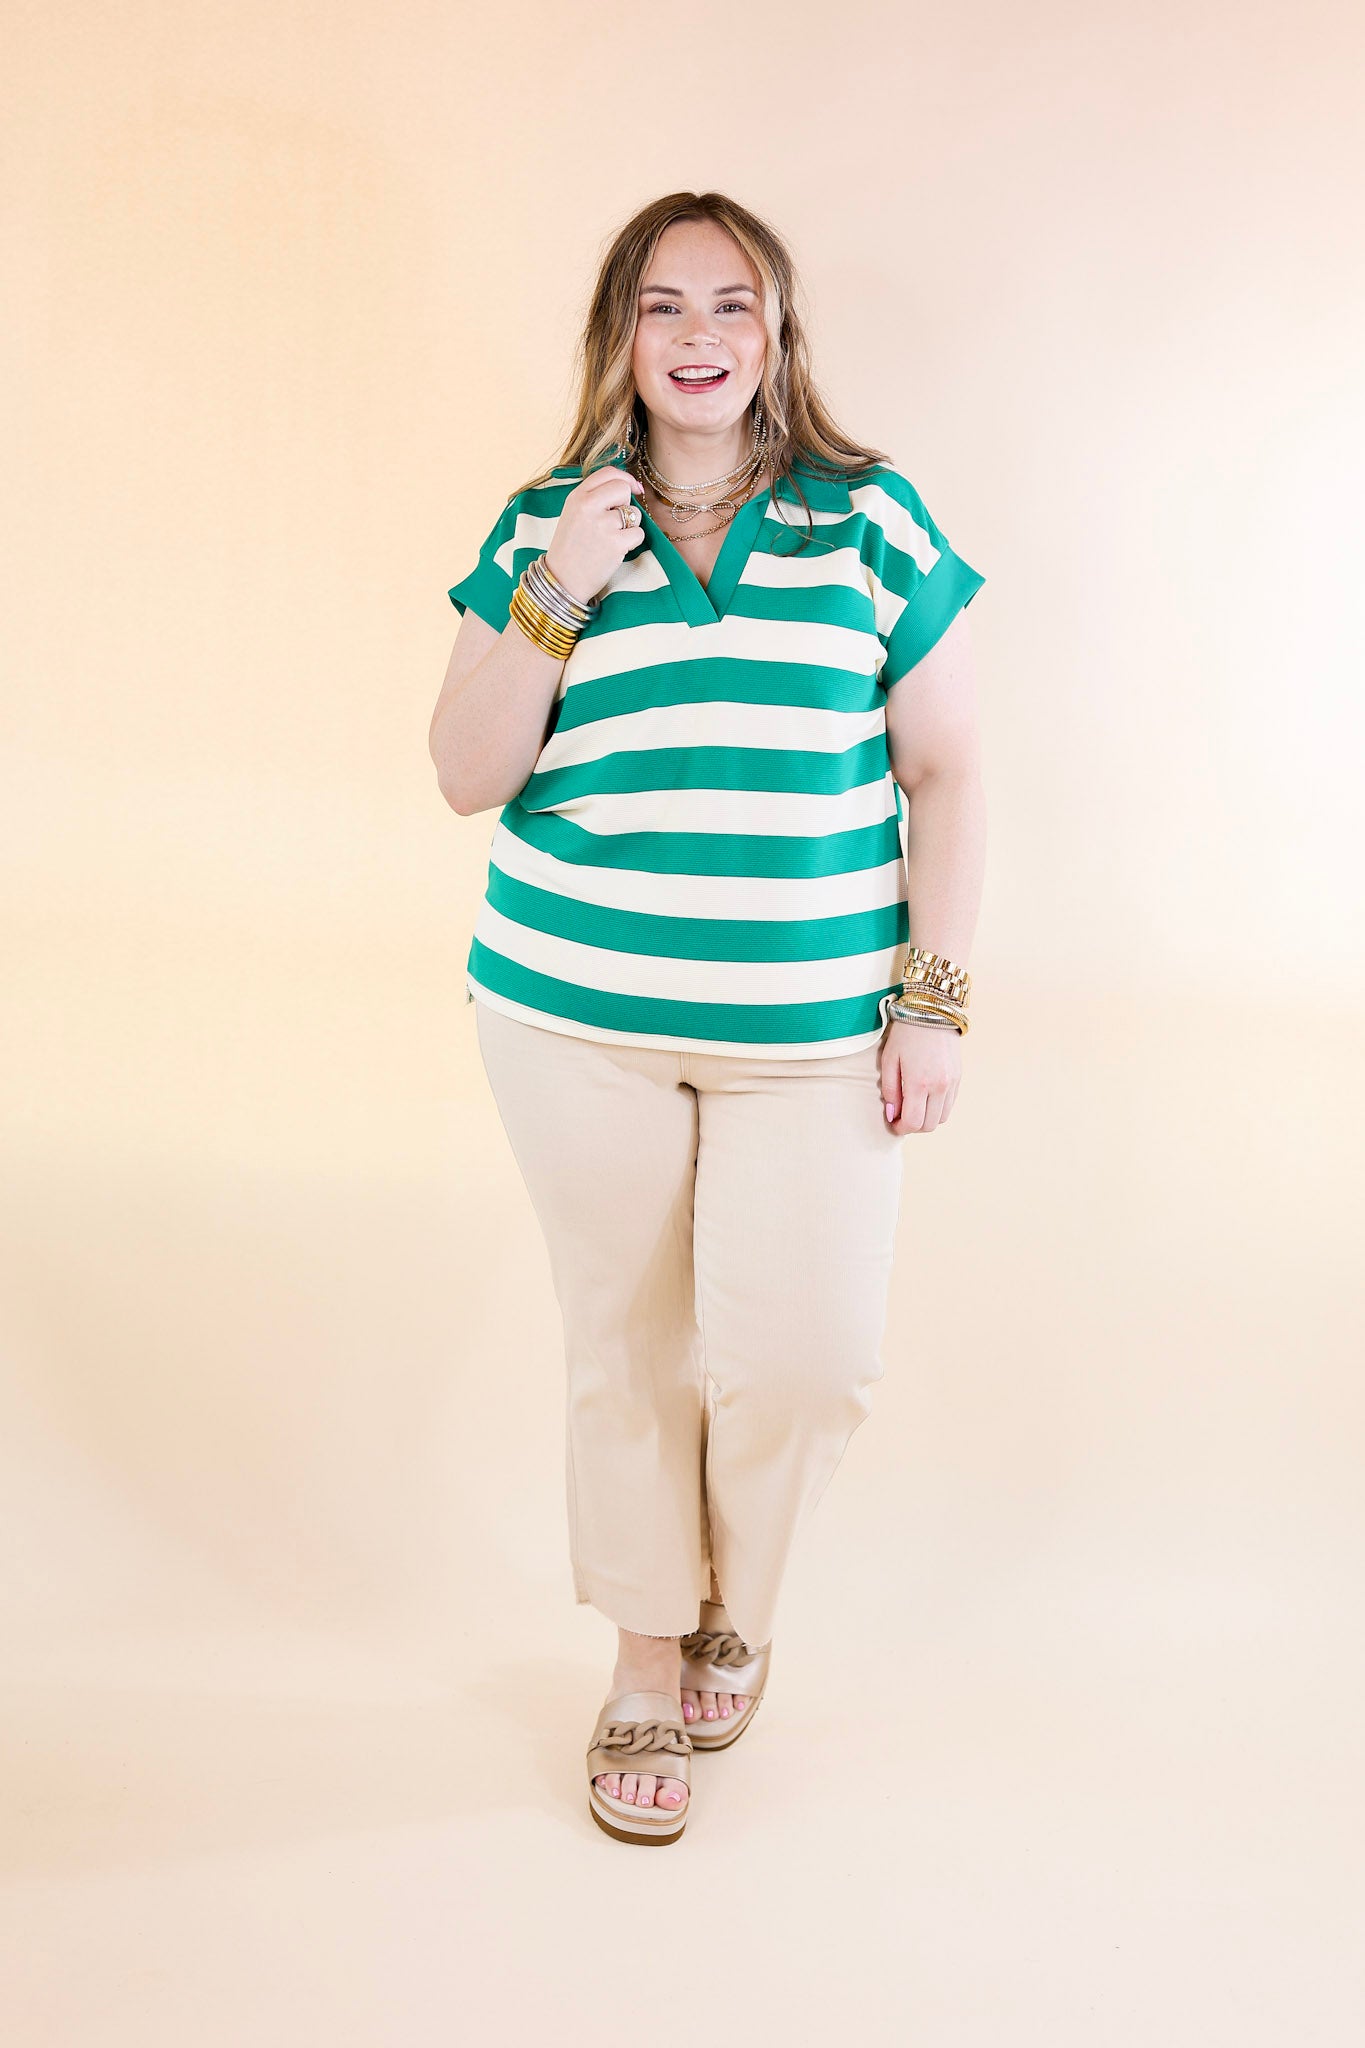 Stripe it Simple Collared Stripe Top with Drop Sleeves in Green and Cream - Giddy Up Glamour Boutique